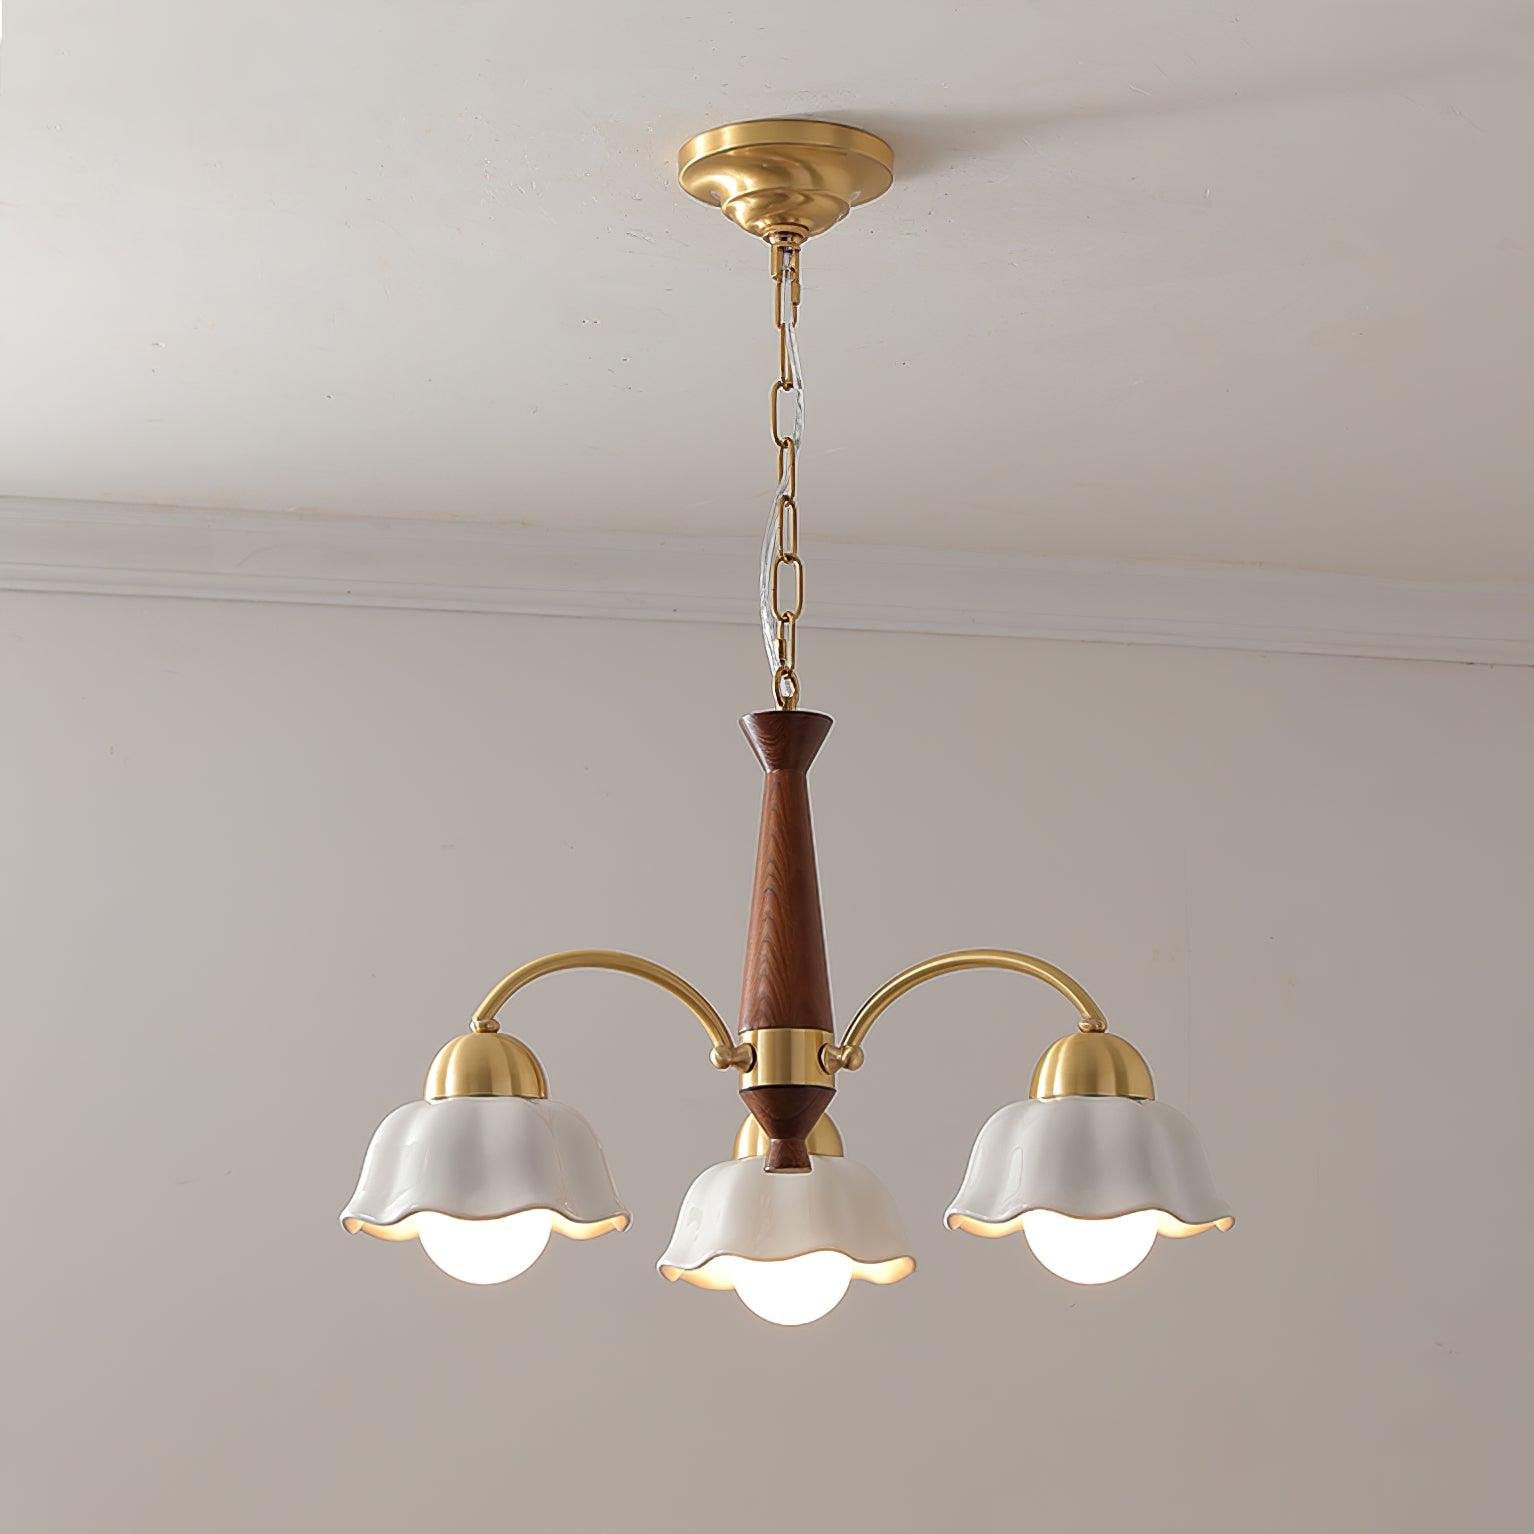 3-light Swedish Modern Brass Chandelier with Walnut Wood Accent, measuring 23.6 inches in diameter and 14.6 inches in height (or 60cm x 37cm)